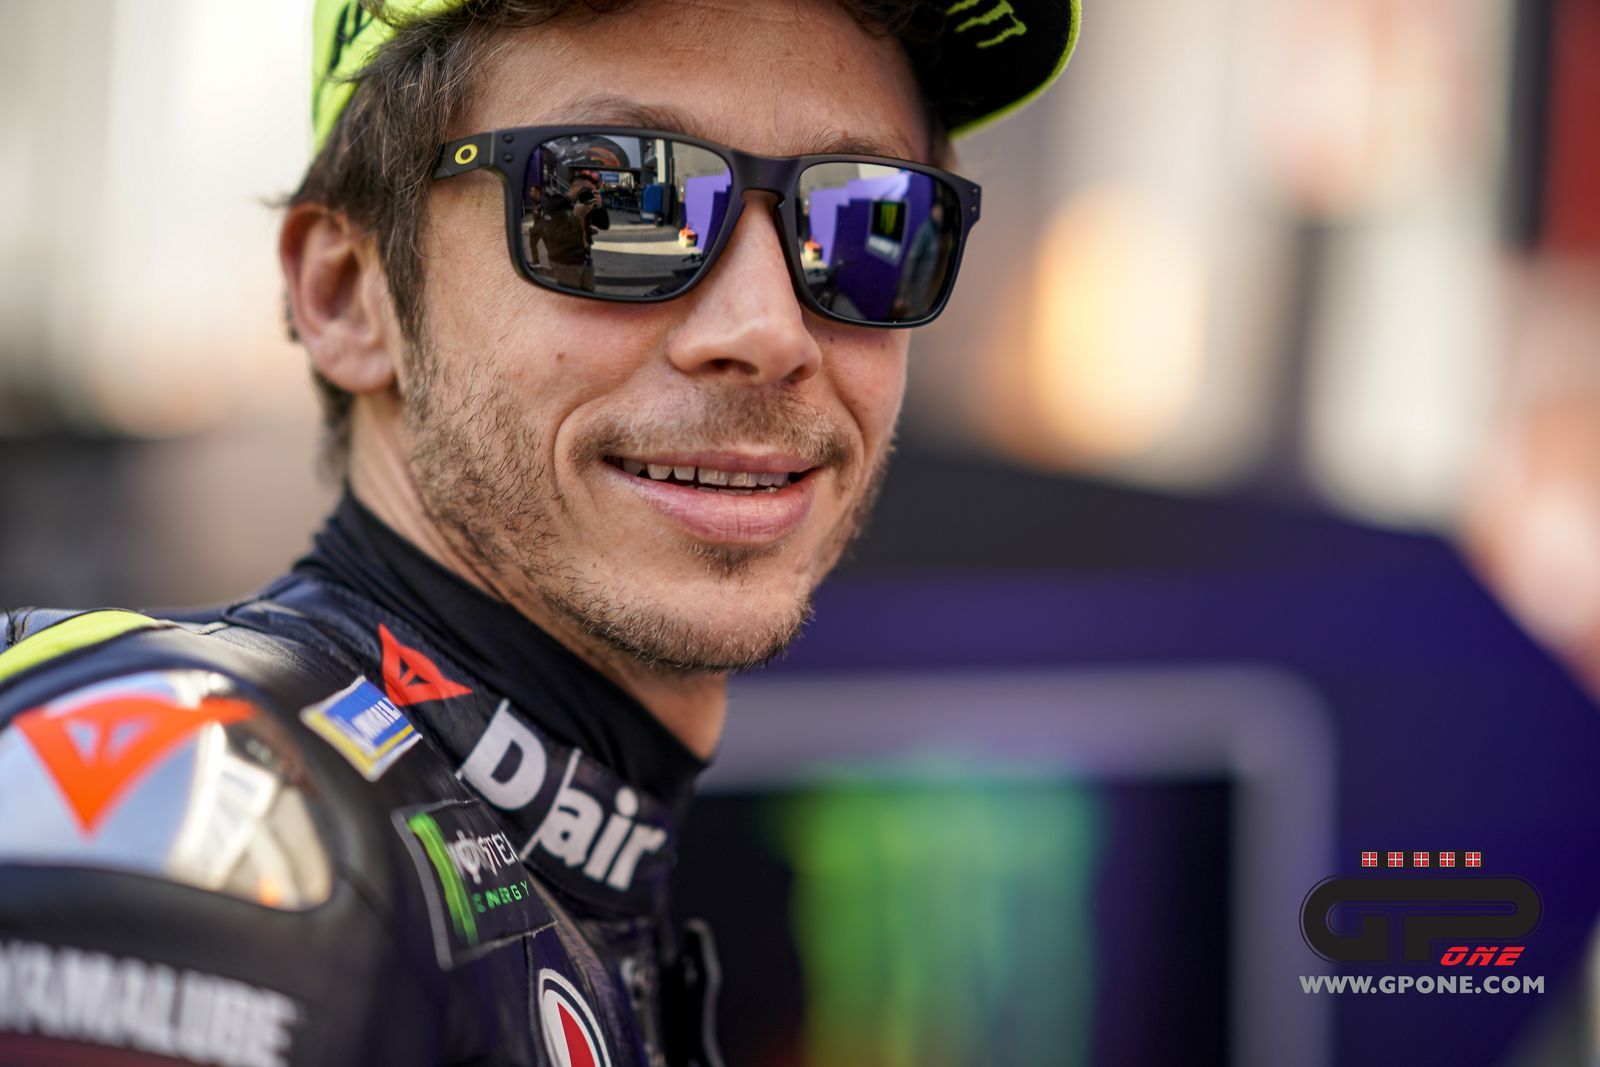 MotoGP, Valentino Rossi, 'For Your Eyes Only' (i.e. TV) signs renewal ...